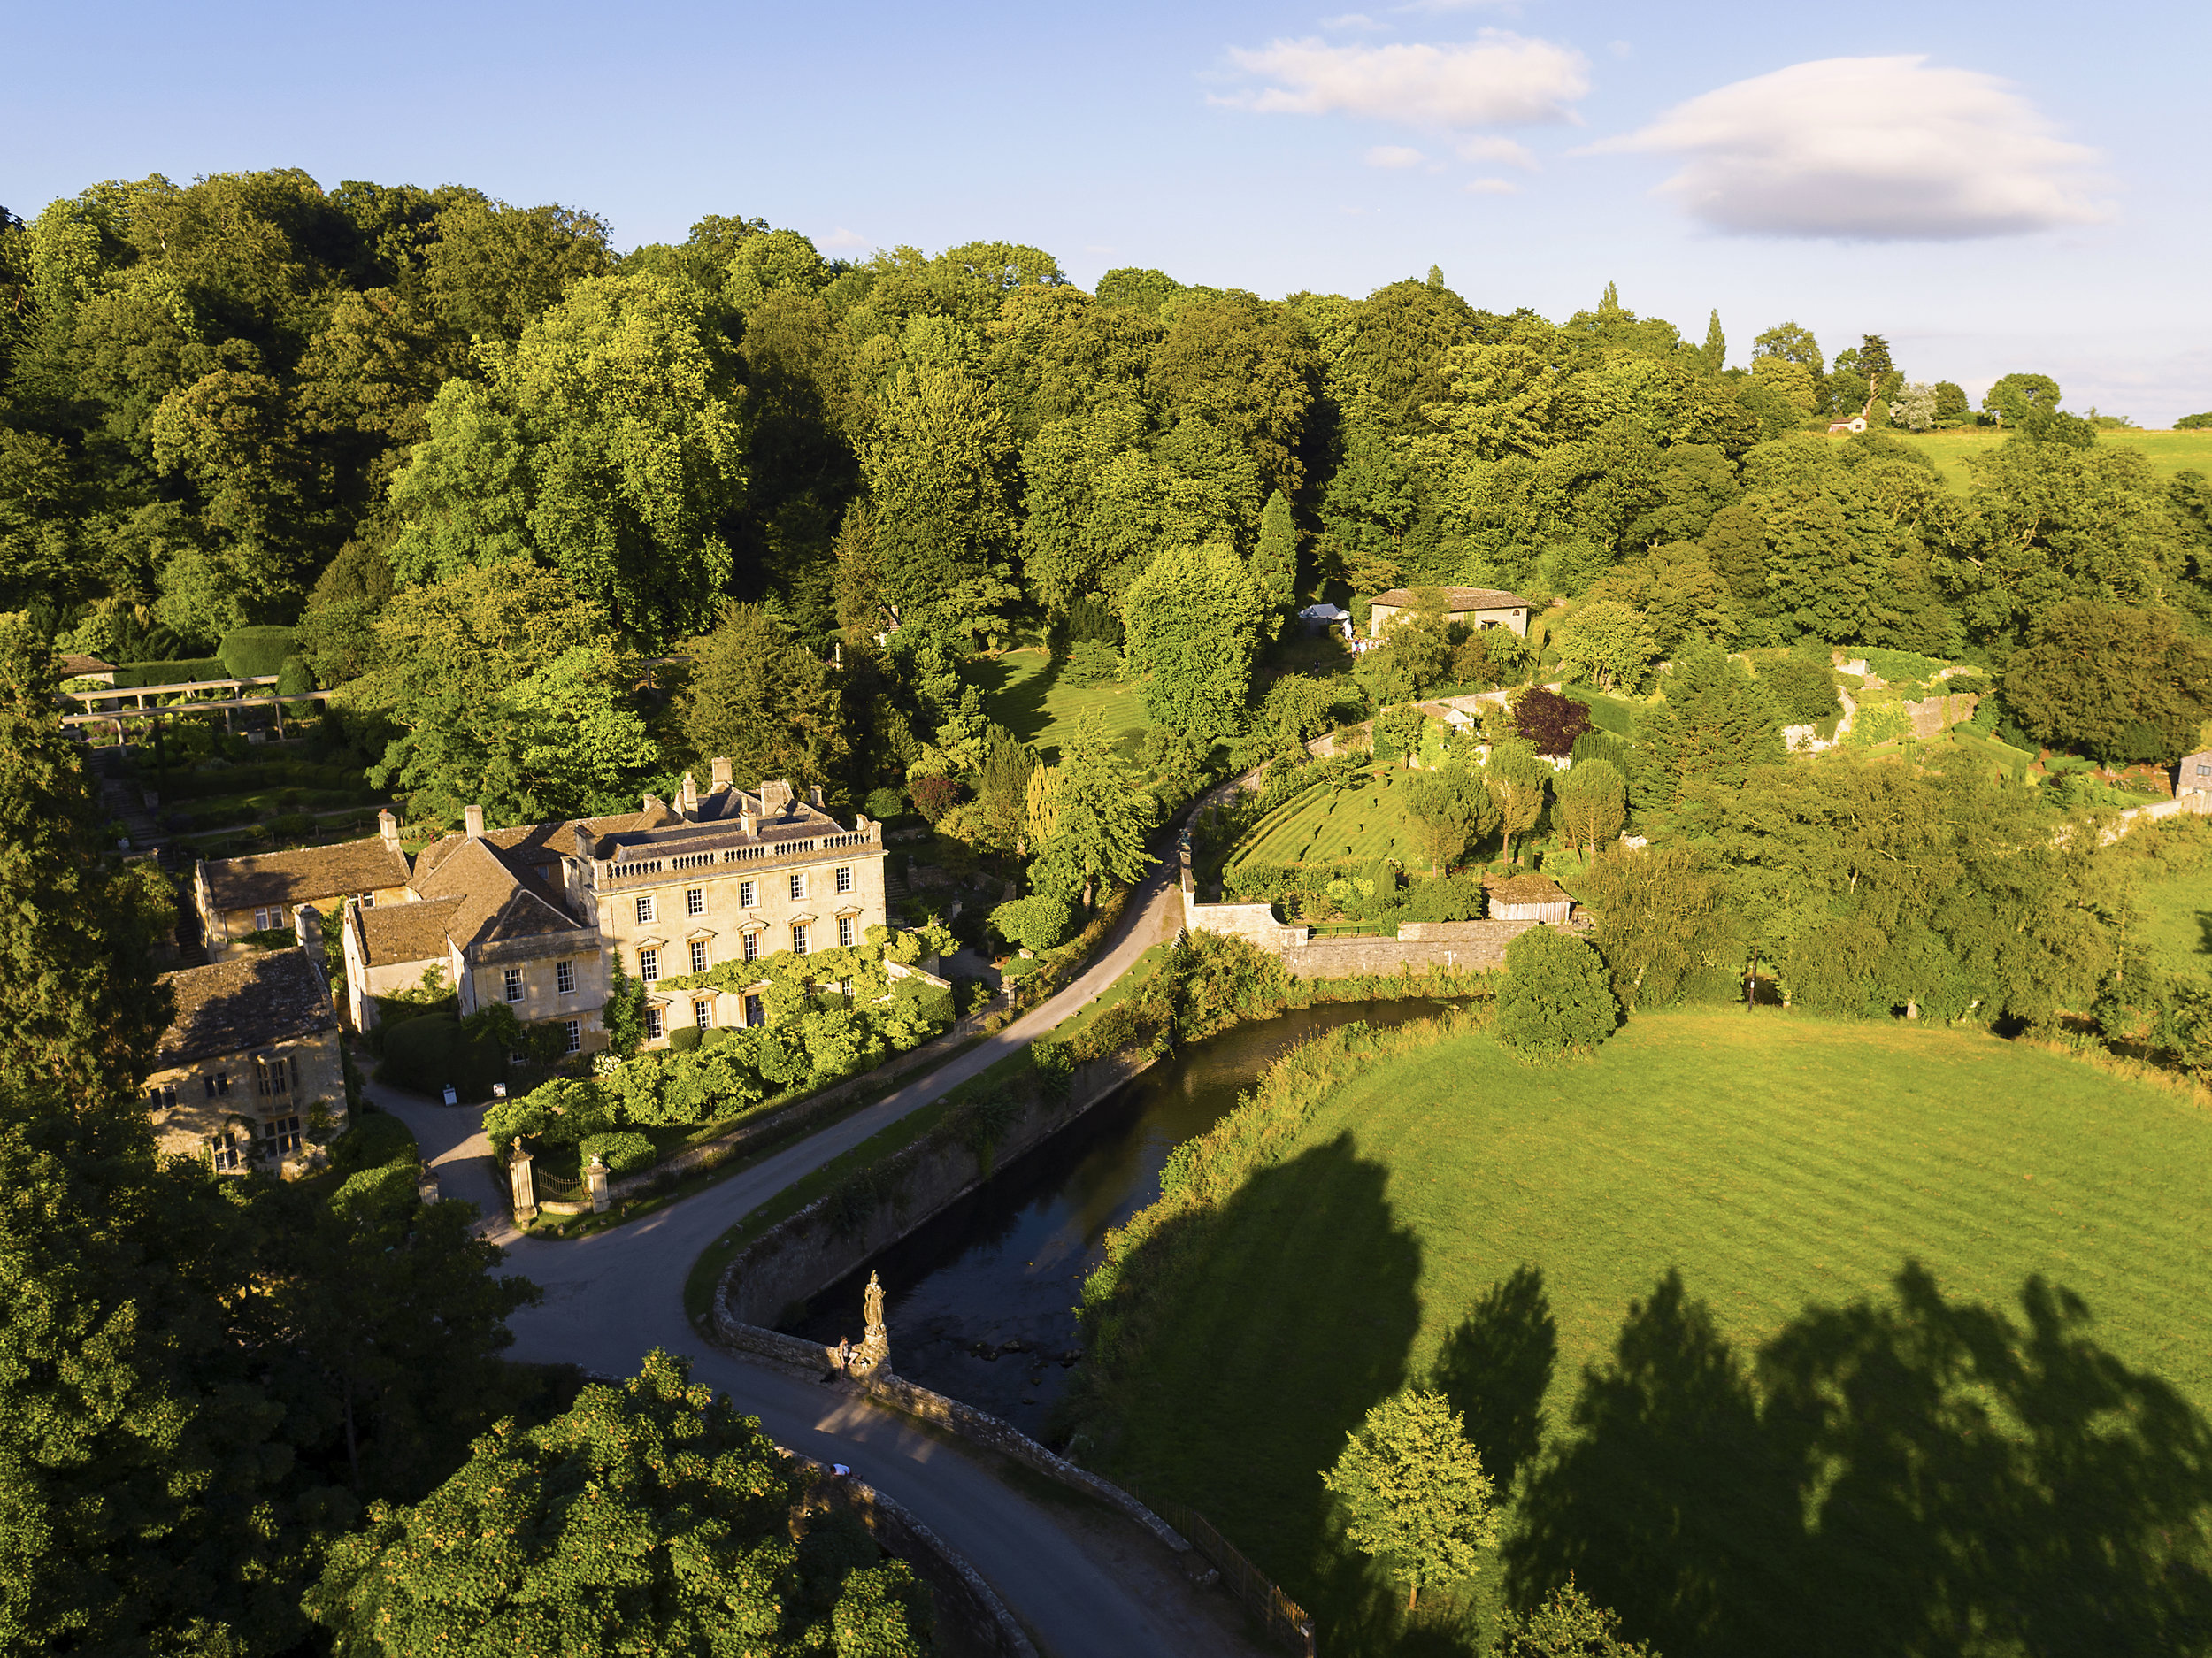 Iford Manor from the Air